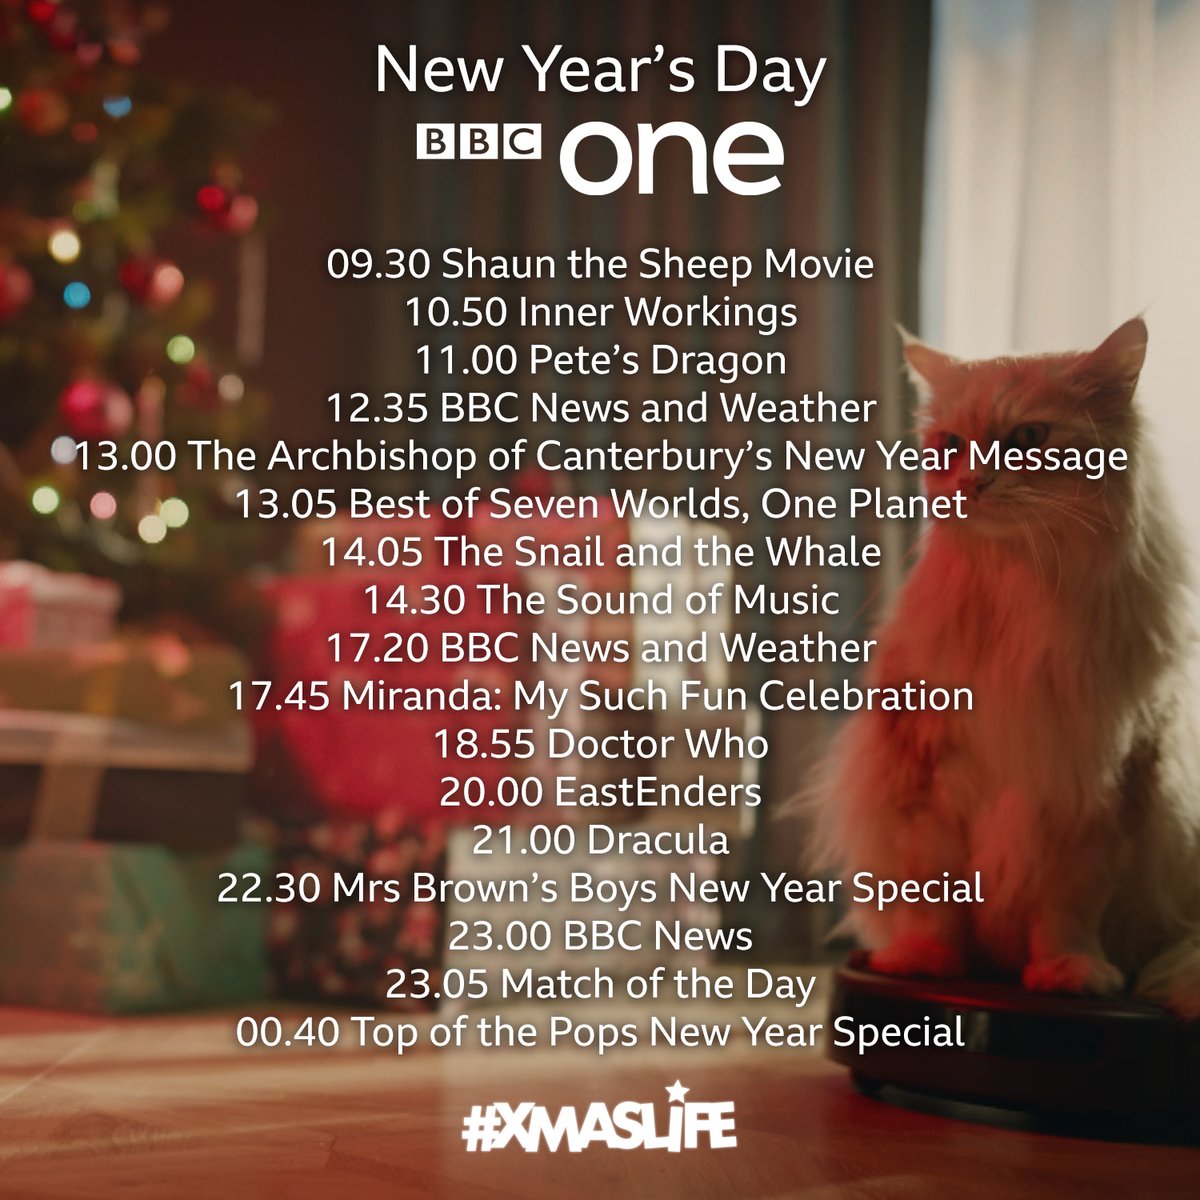 bbc one christmas 2020 Bbc One On Twitter This Is Your New Year S Day With Bbc One Happy New Year Everyone Xmaslife bbc one christmas 2020